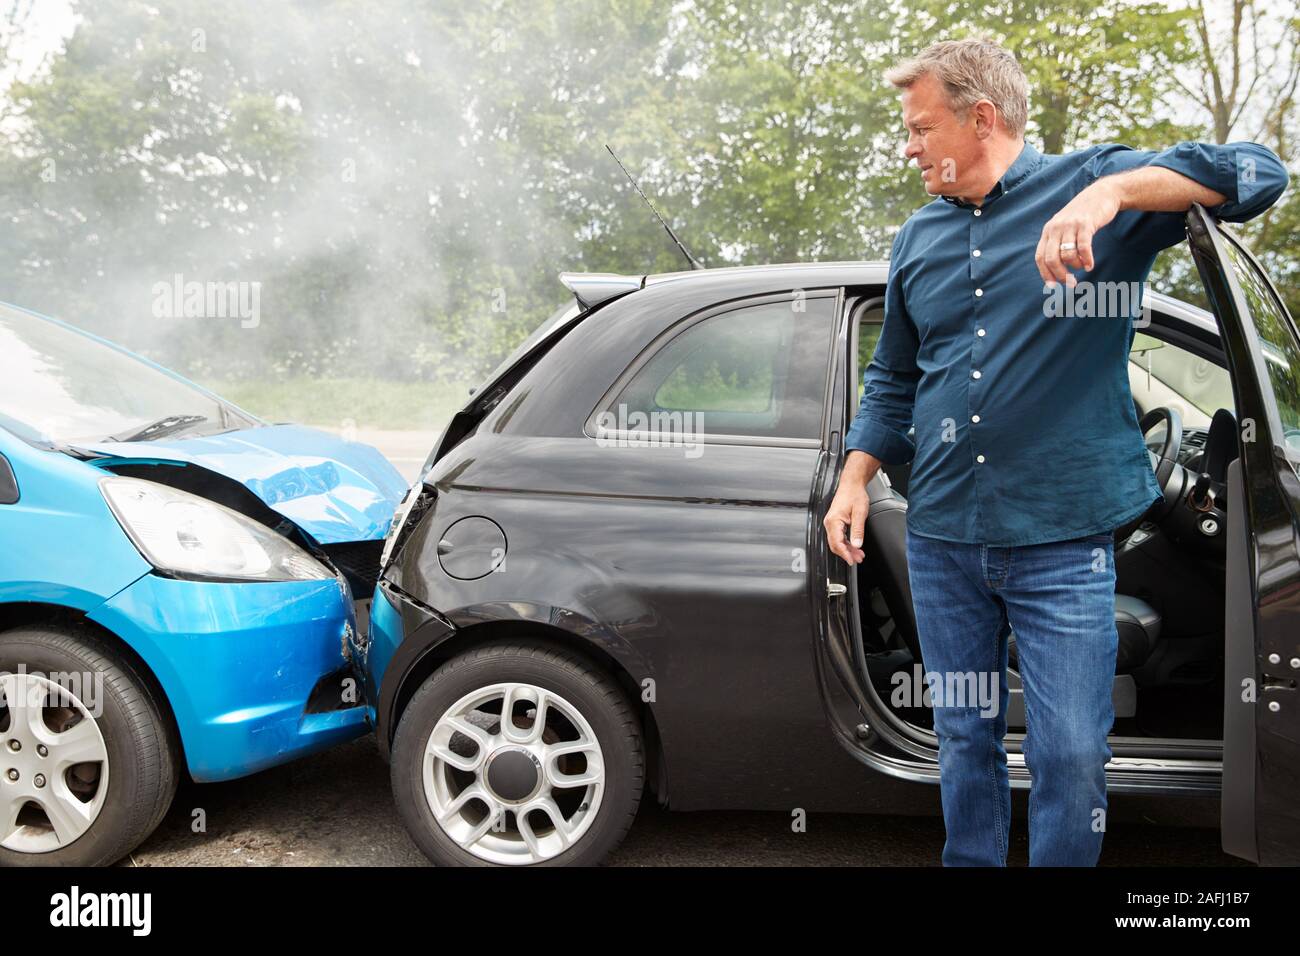 Mature Male Motorist In Crash For Crash Insurance Fraud Getting Out Of Car Stock Photo